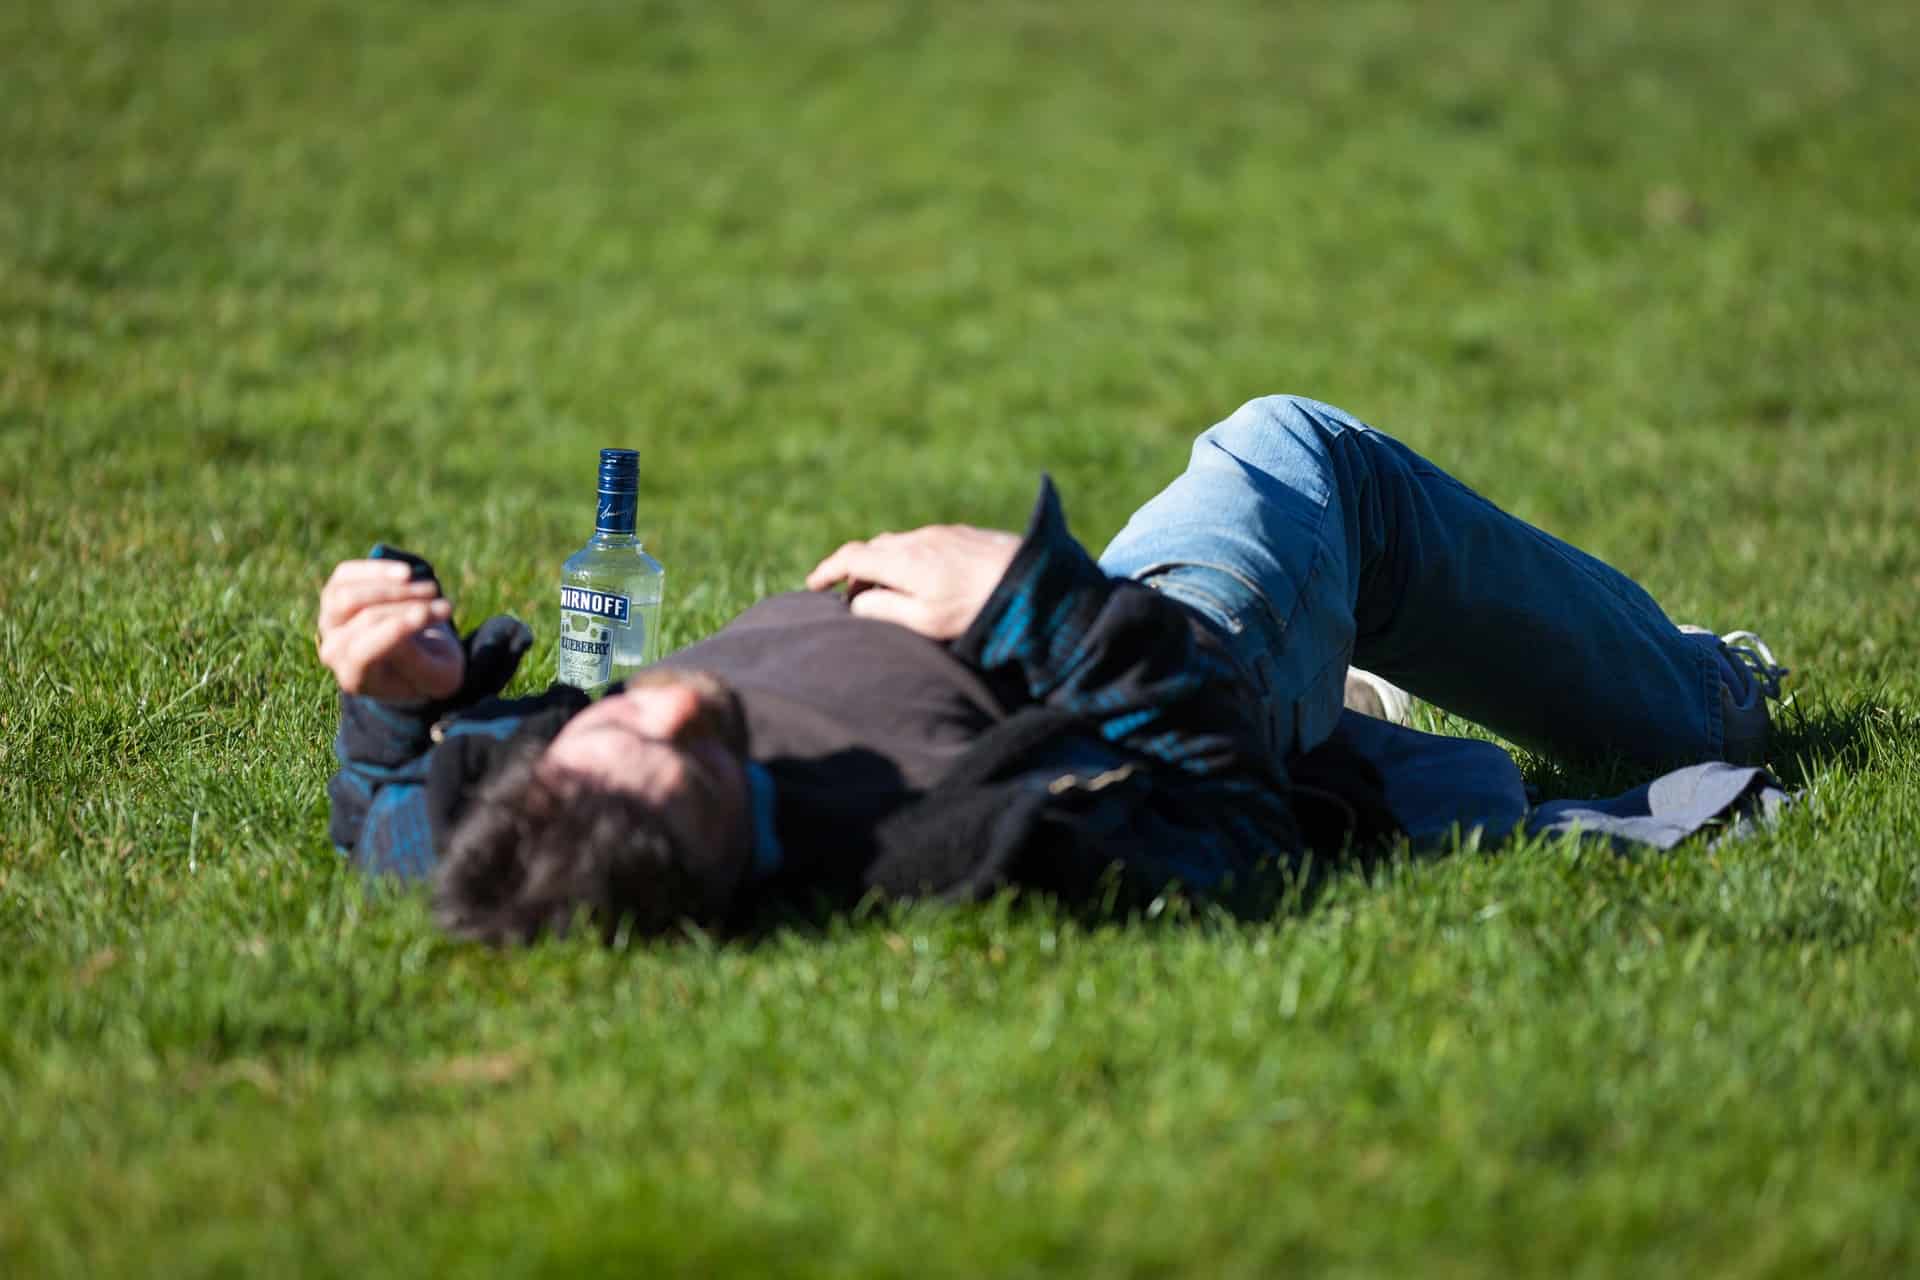 A white man passed out in the grass by a liquor bottle